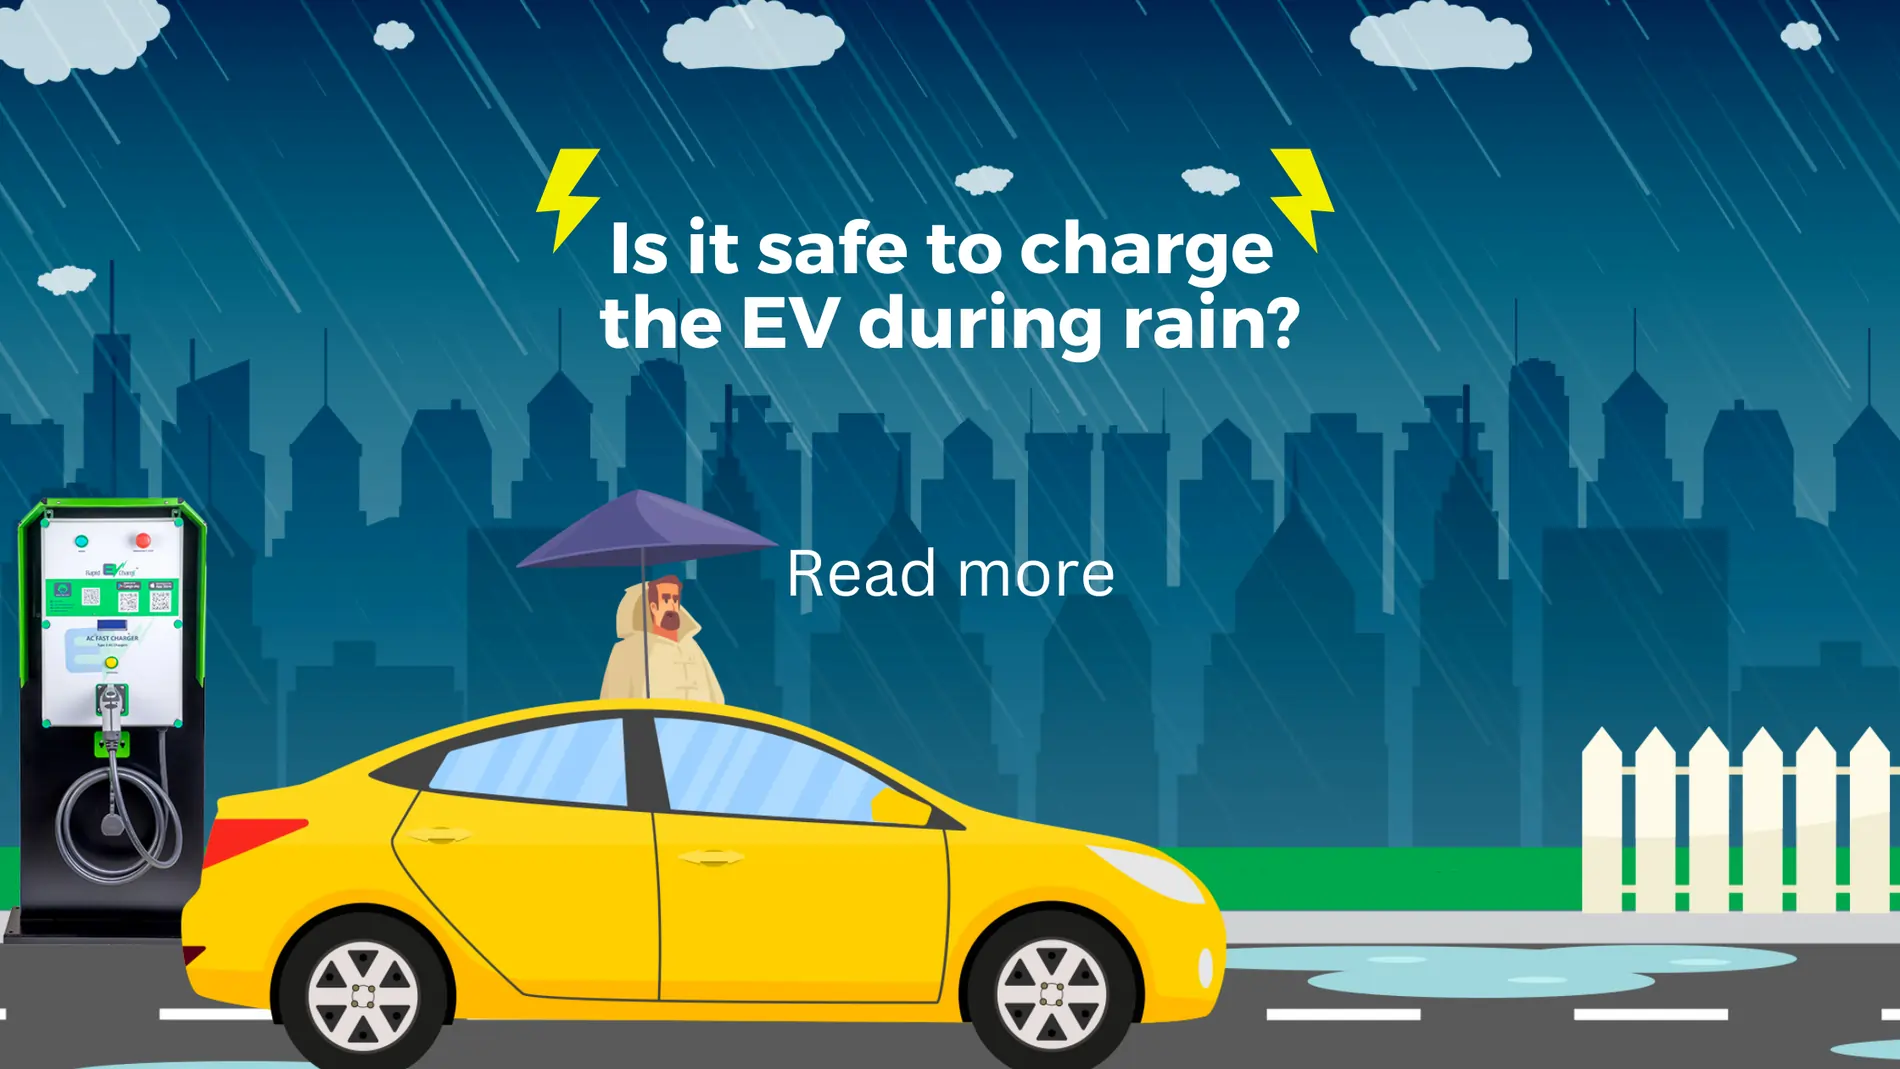 EV Charging Safety in Rainy Conditions